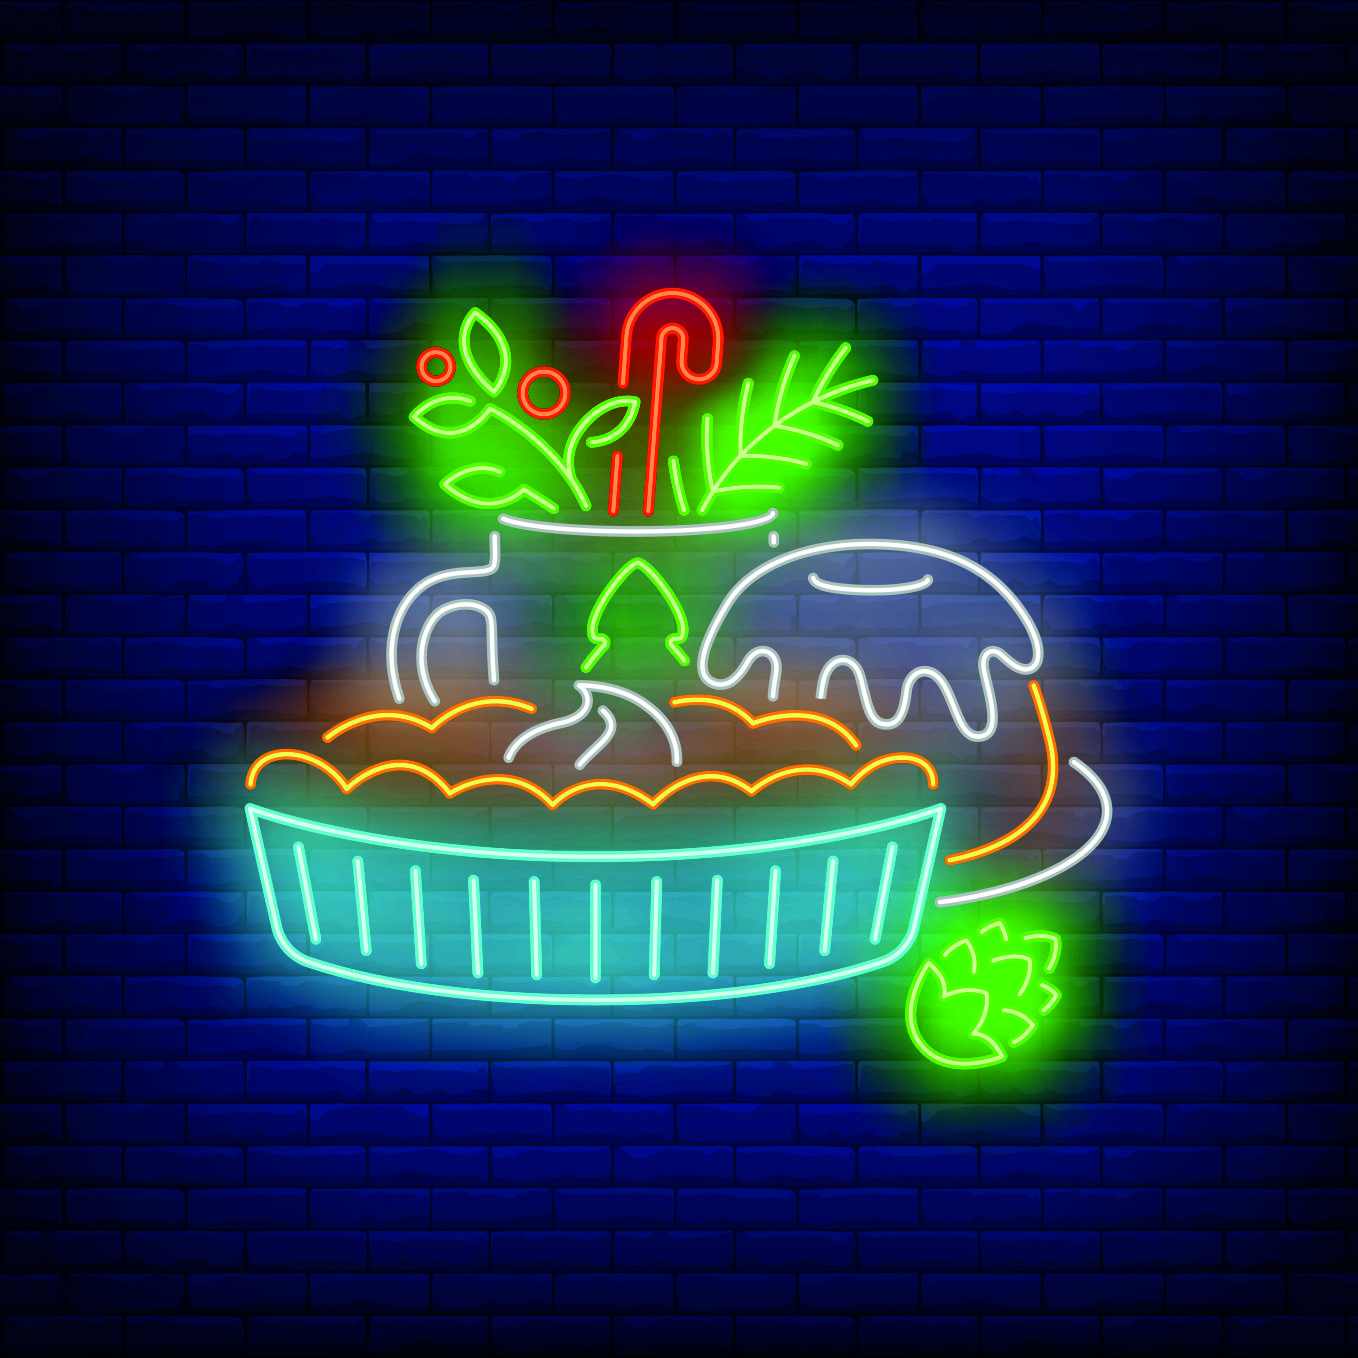 Christmas cakes and drink neon sign